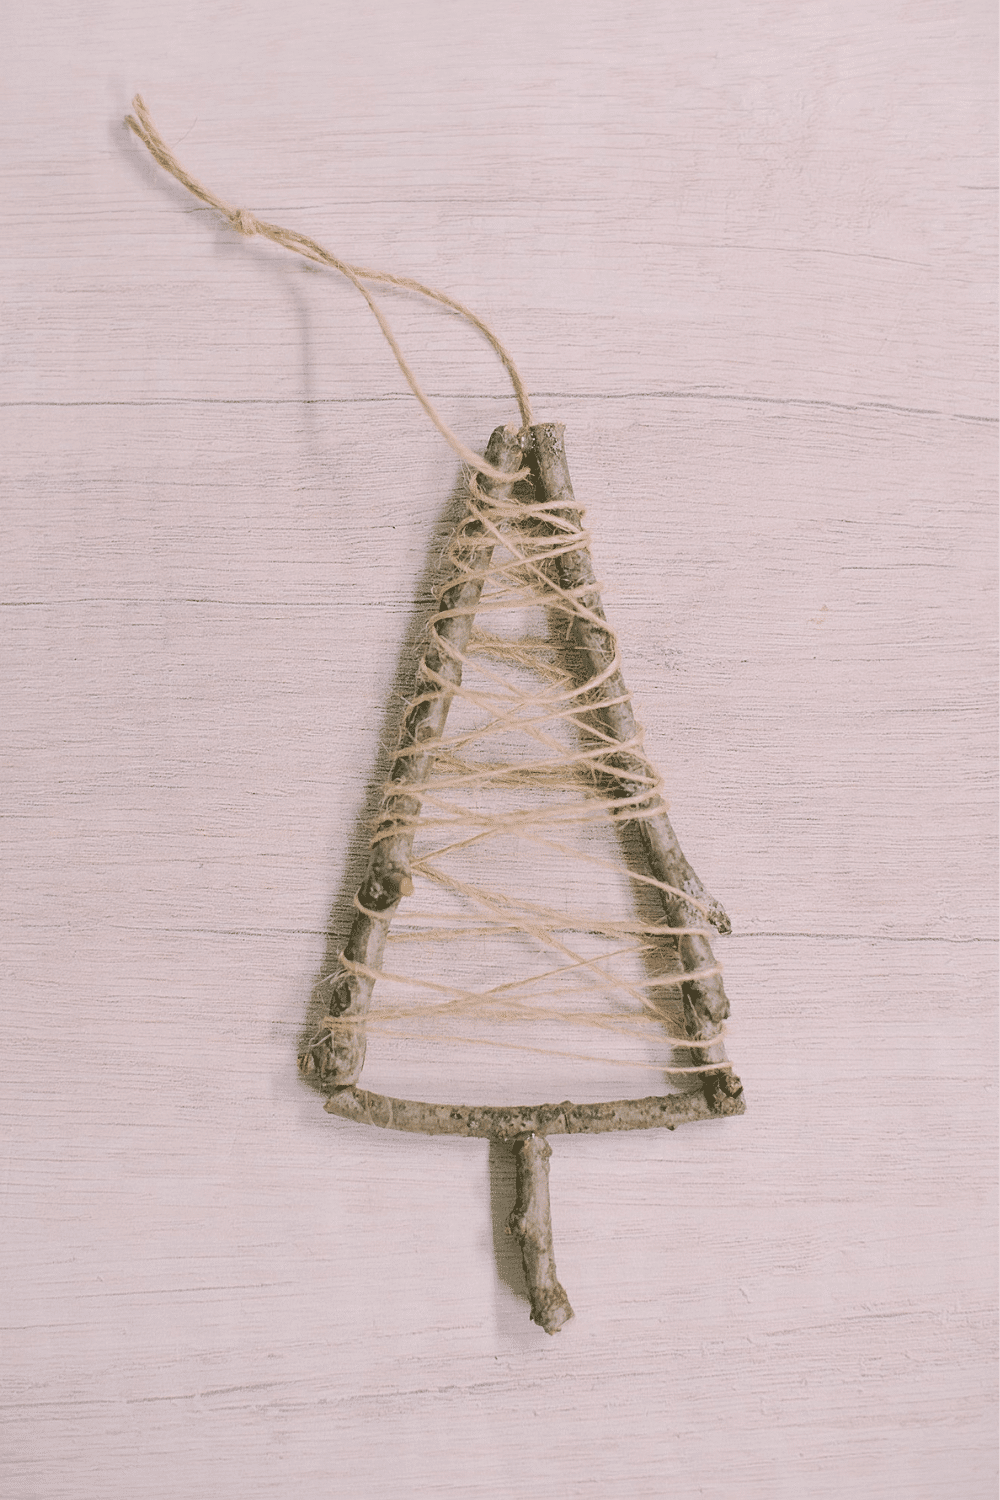 How to Make a Twine-Wrapped Stick Tree Ornament